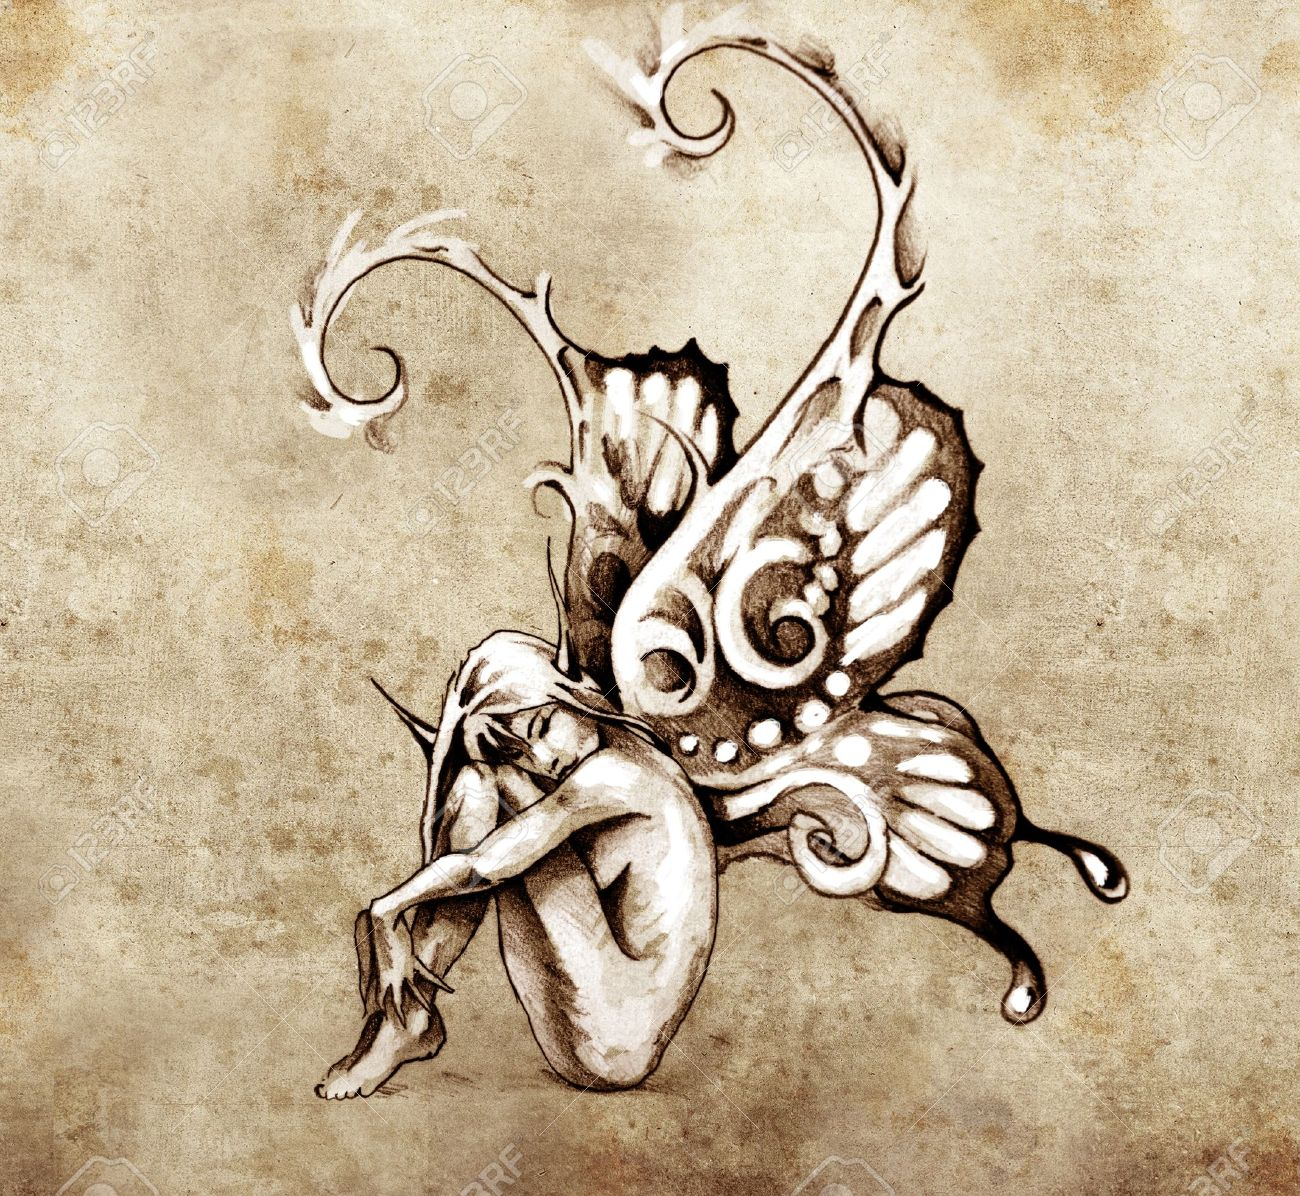 Sketch Of Tattoo Art Fairy With Butterfly Wings Stock Photo pertaining to dimensions 1300 X 1196